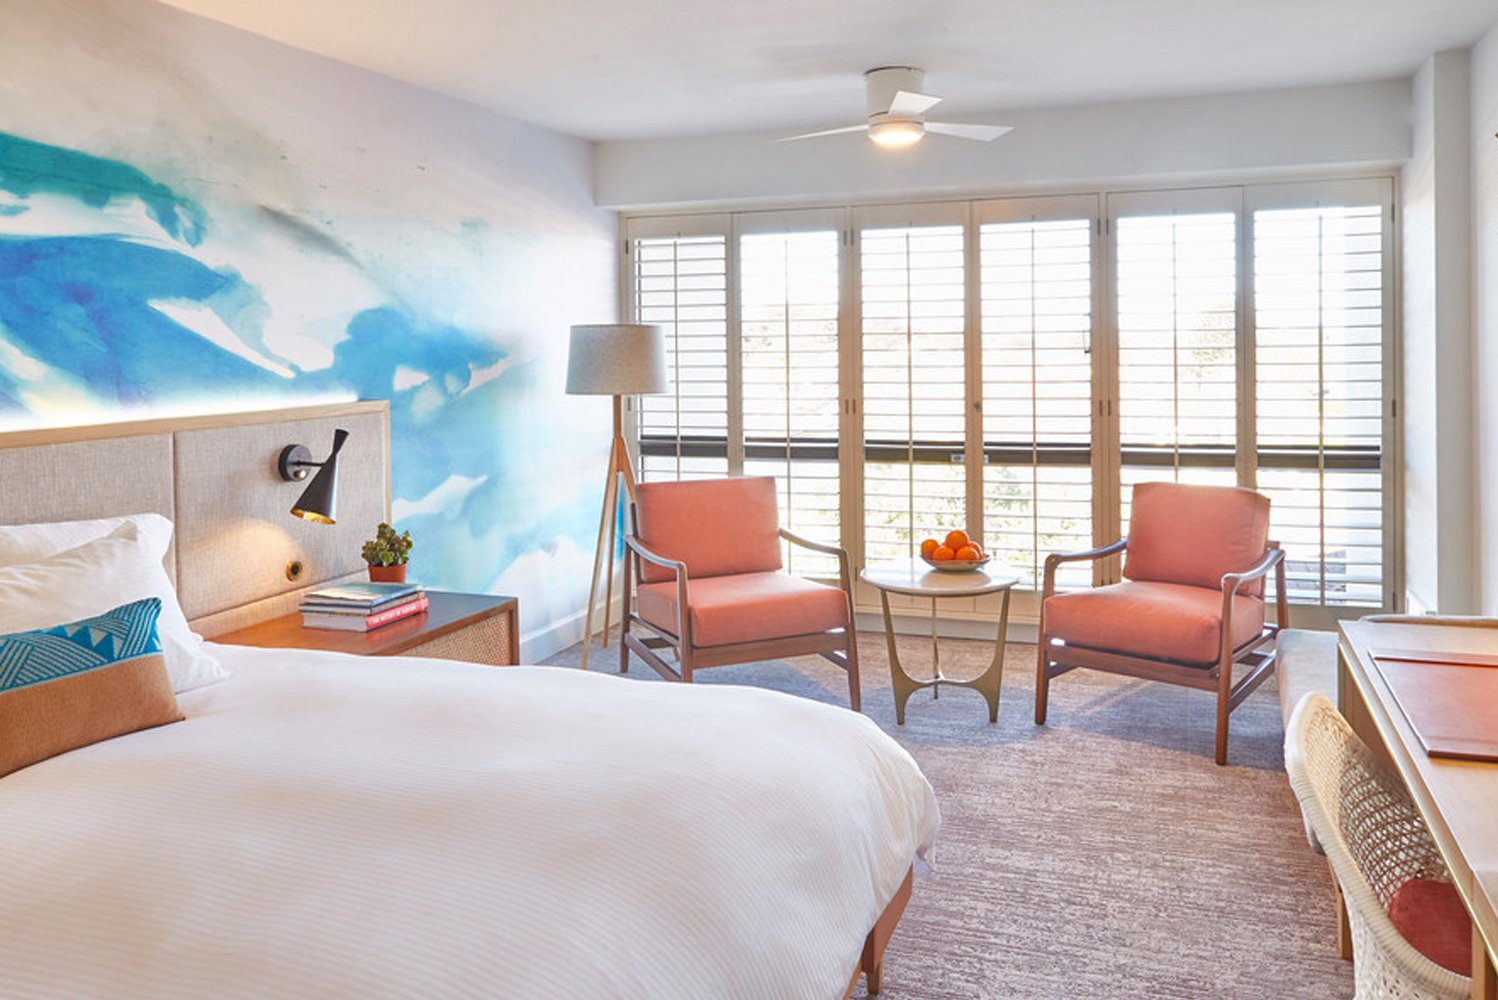 Portola Hotel  Spa the Four-Diamond hotel situated along Central Californias Monterey Bay is undergoing renovations 